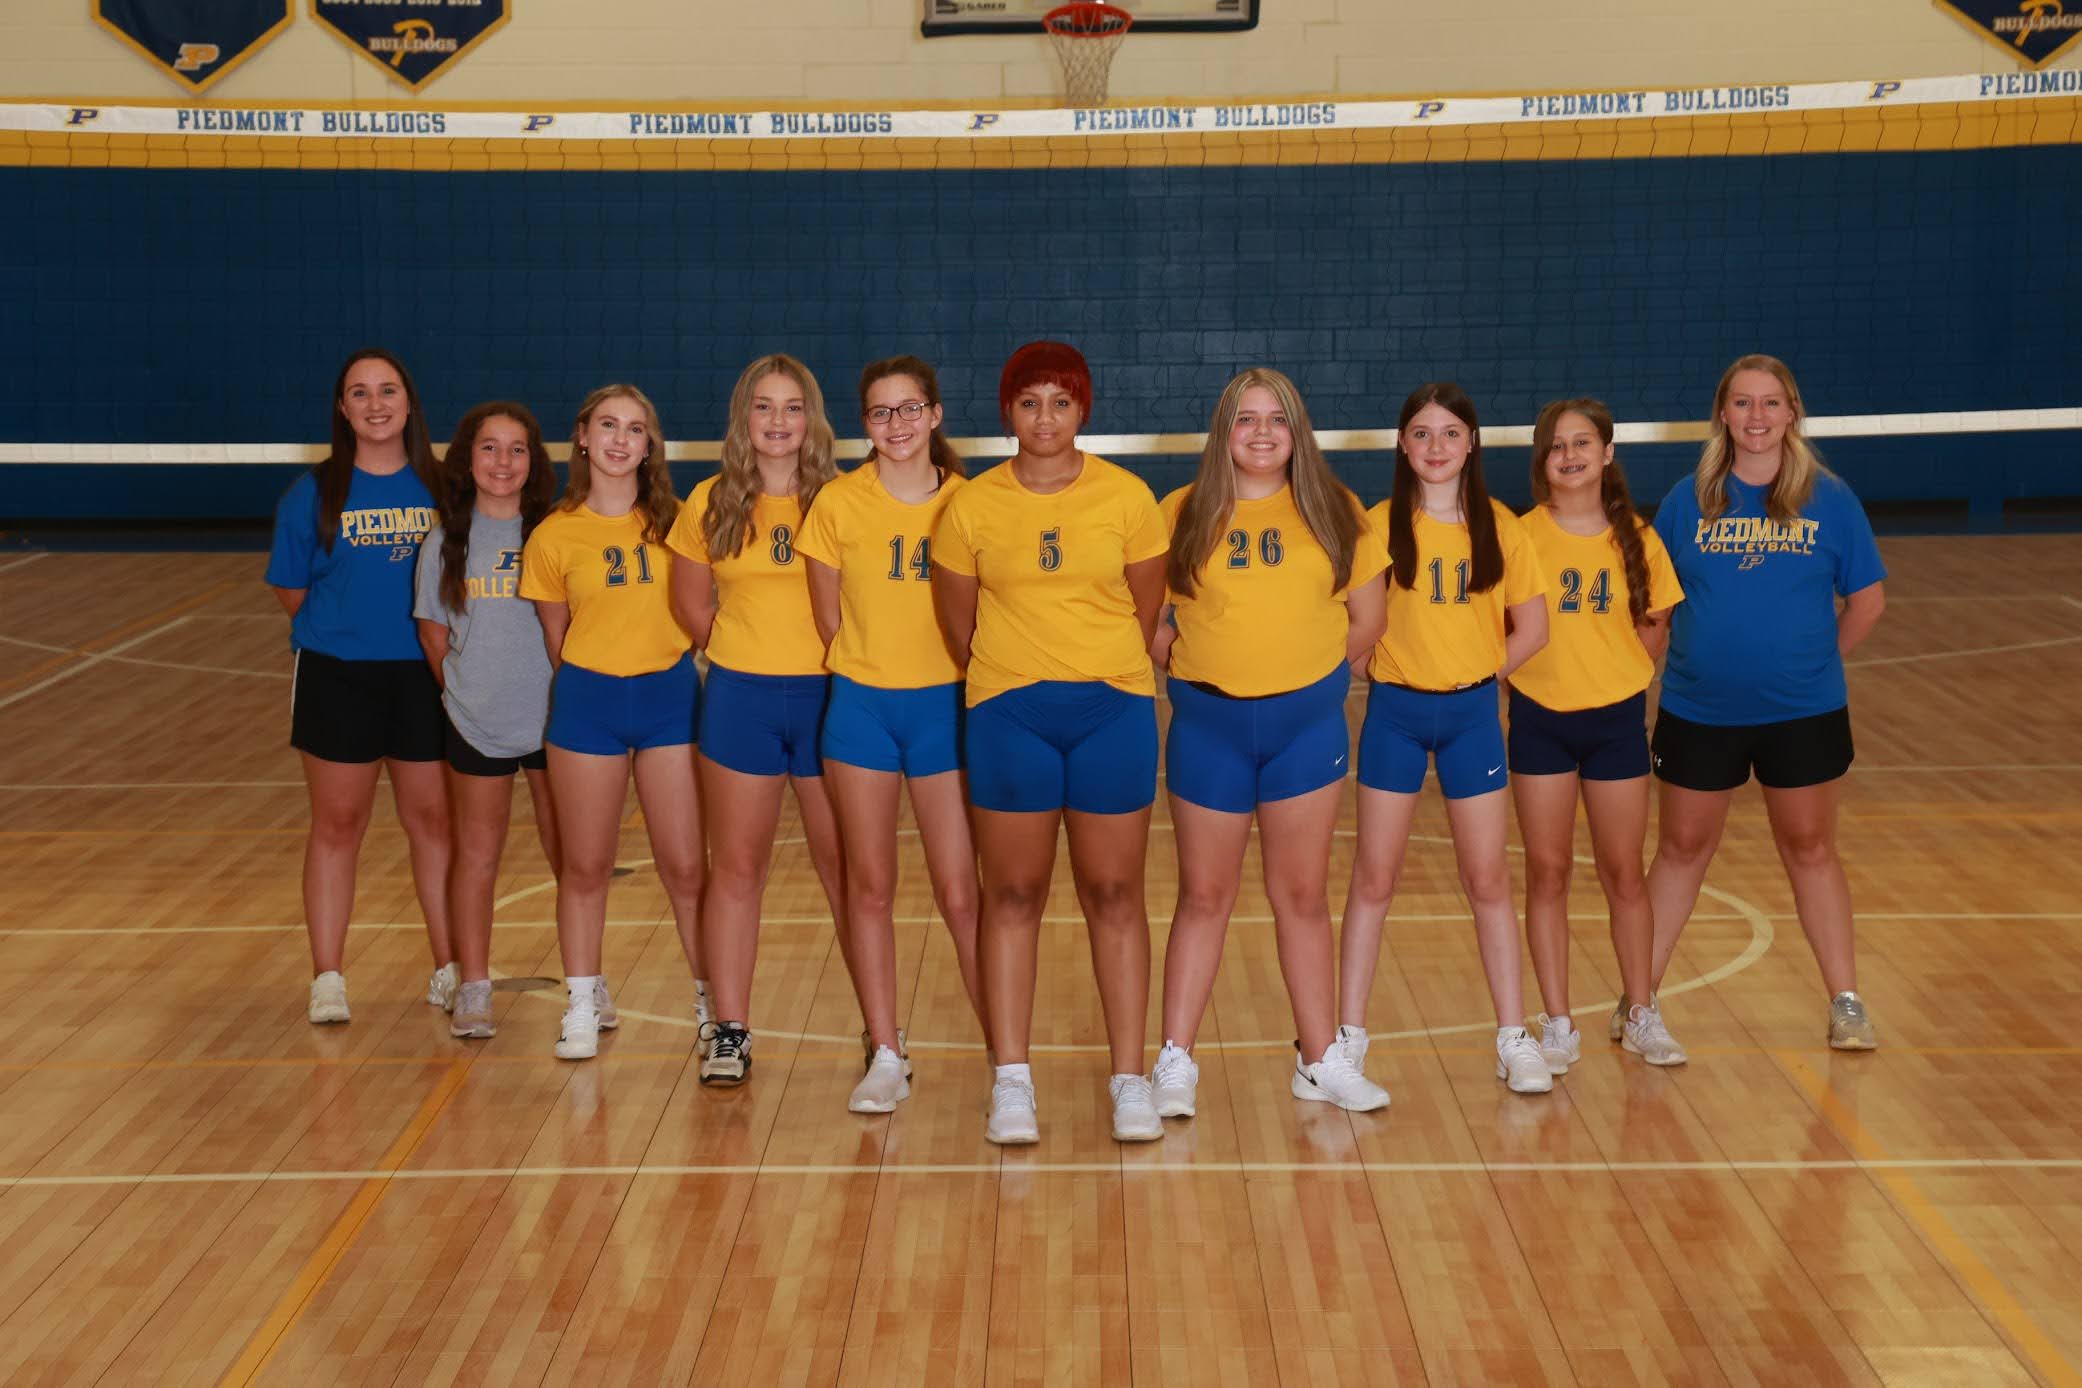 VOLLEYBALL TEAM PICTURE